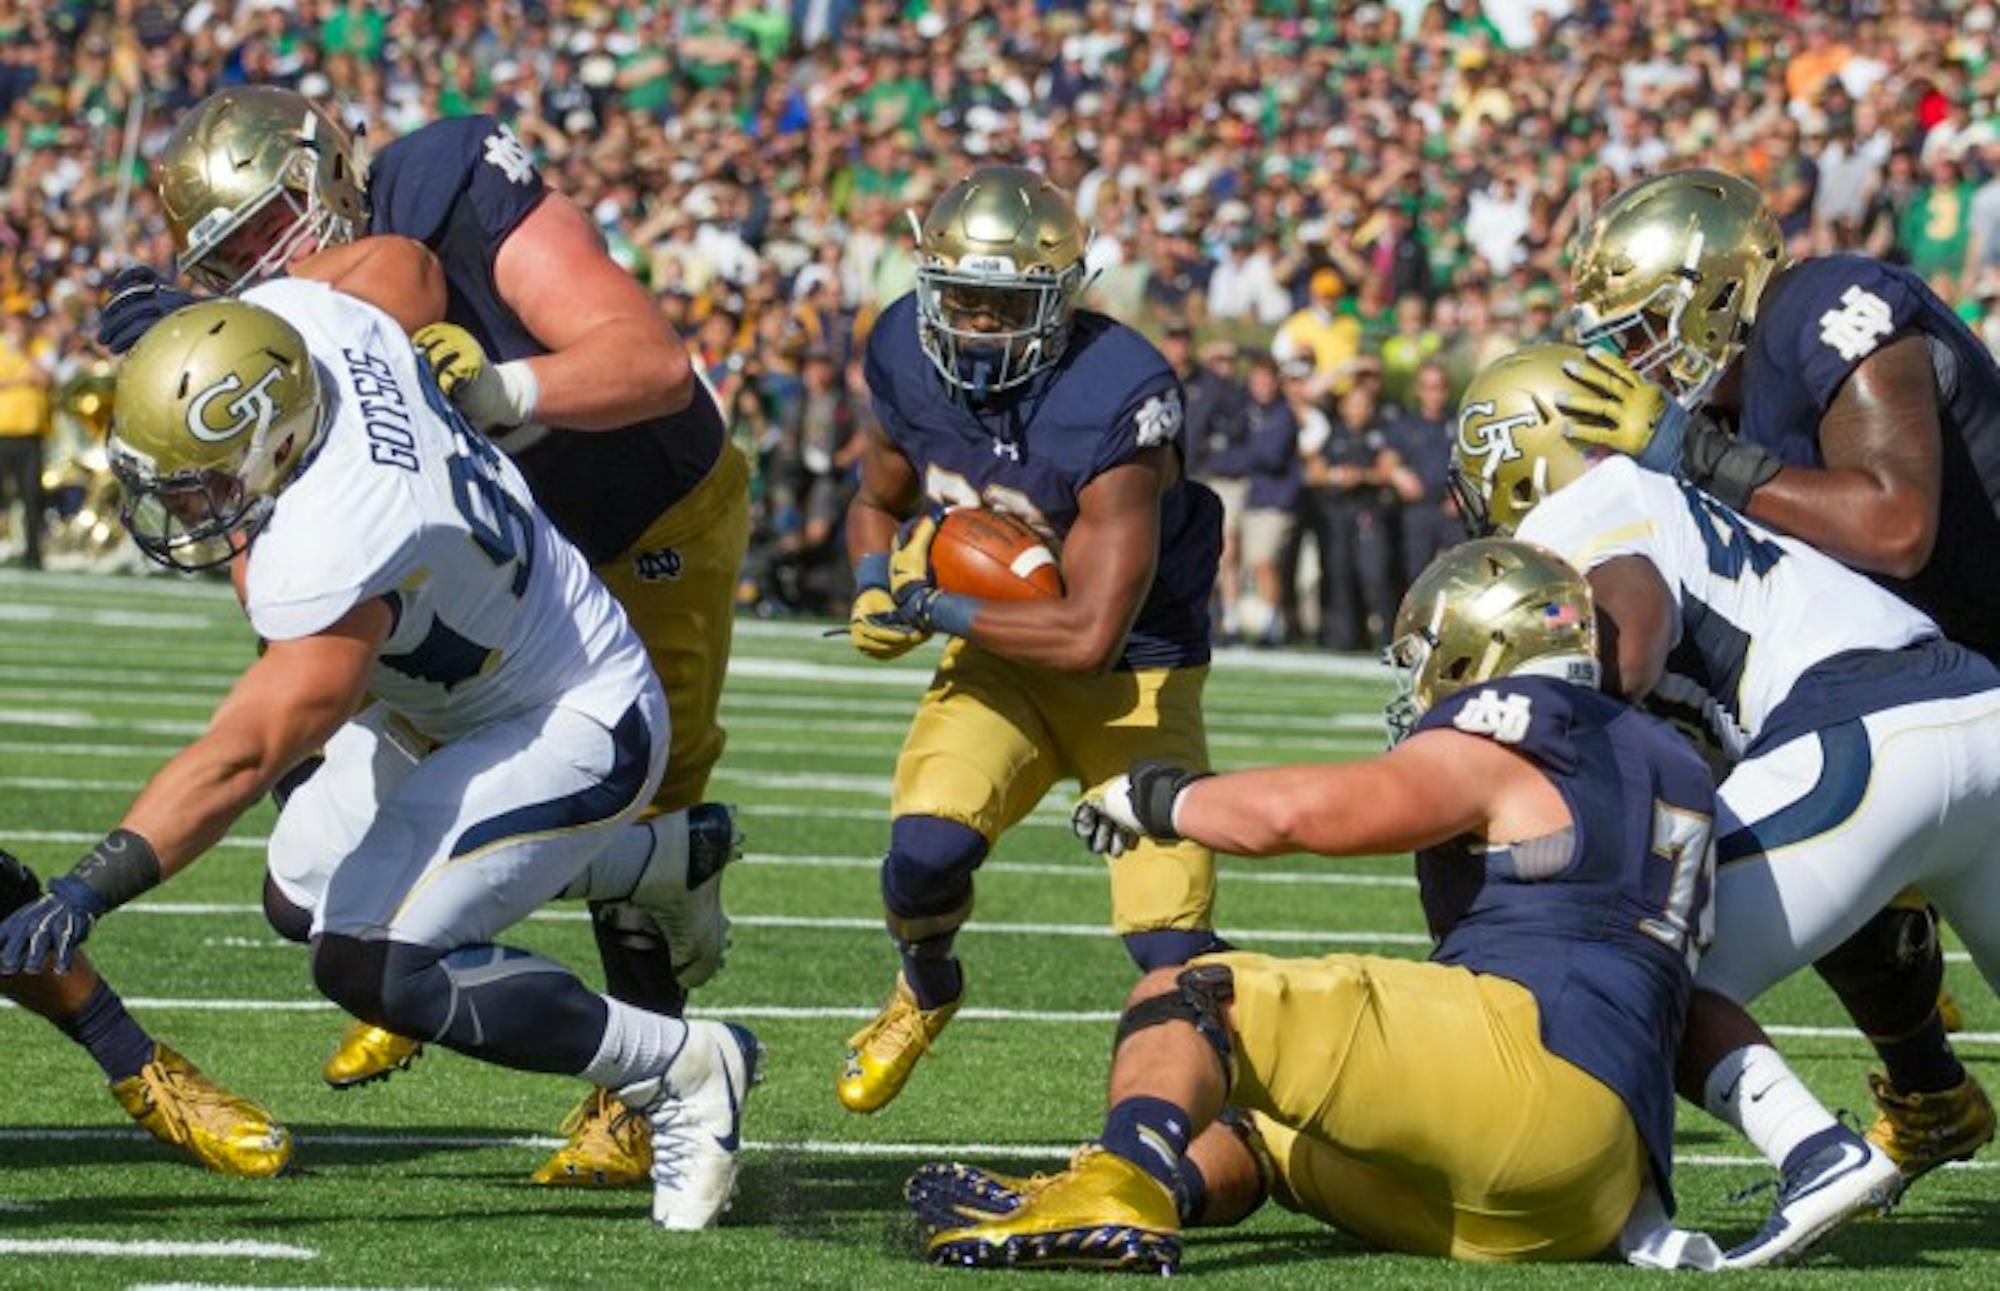 Senior running back C.J. Prosise runs through a hole in Notre Dame’s victory over Georgia Tech on Saturday on his way to 198 rushing yards.